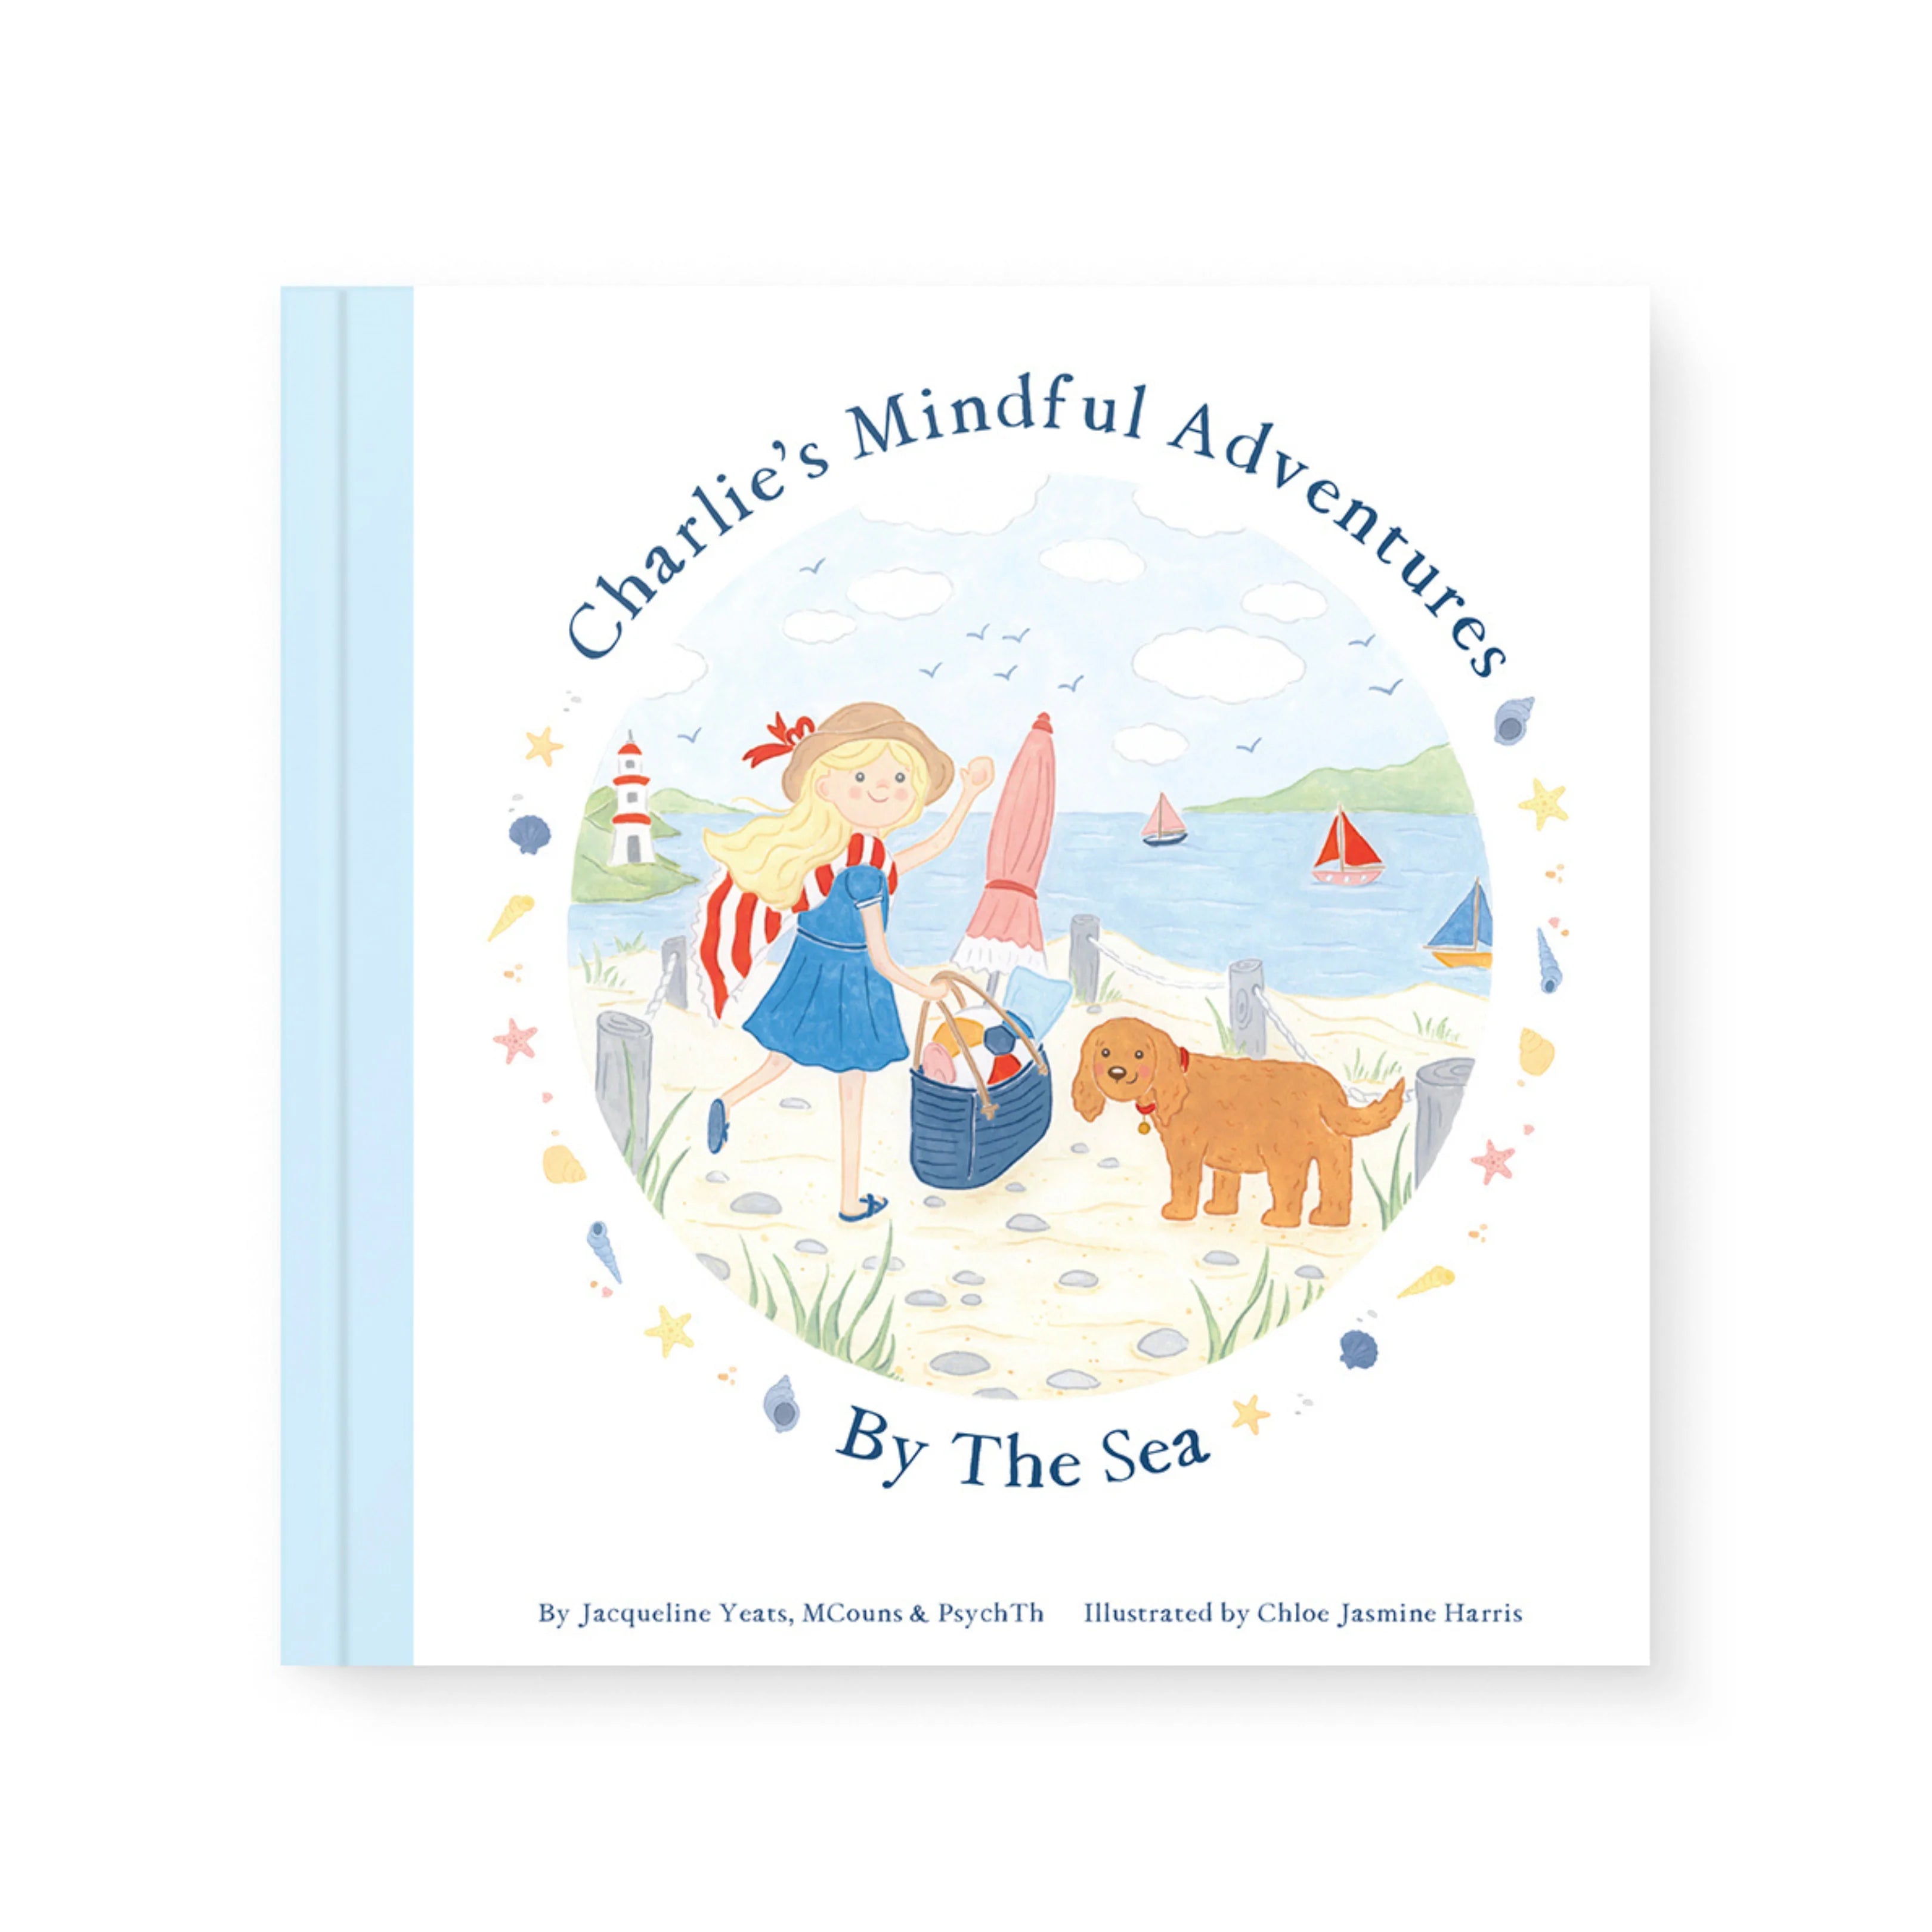 Charlie's Mindful Adventures by the Sea Book